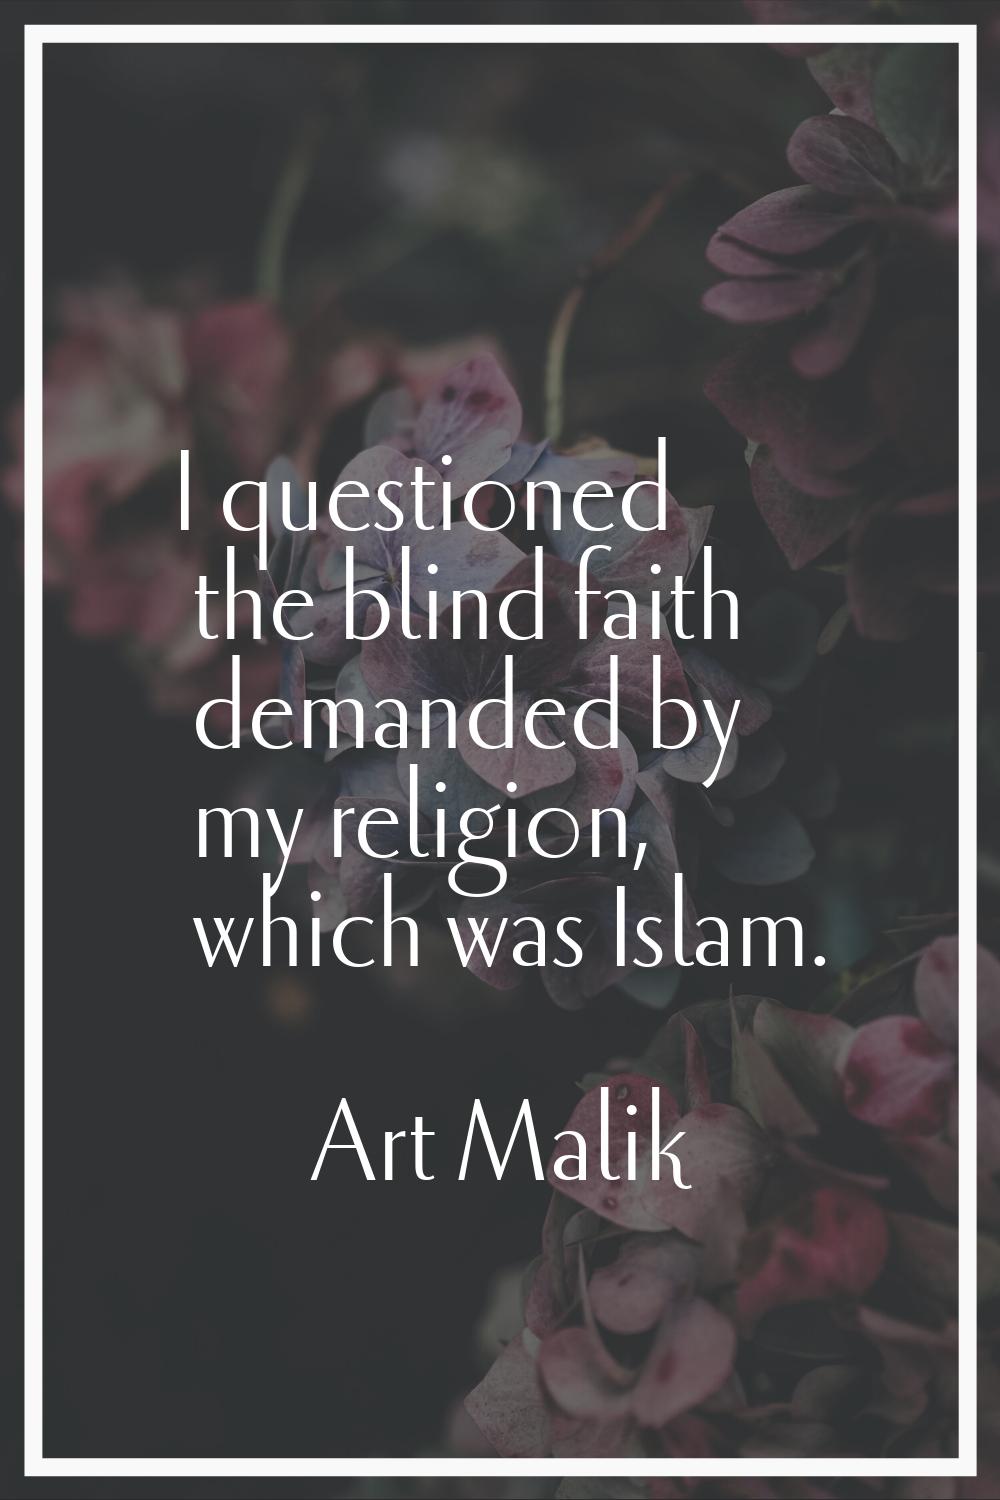 I questioned the blind faith demanded by my religion, which was Islam.